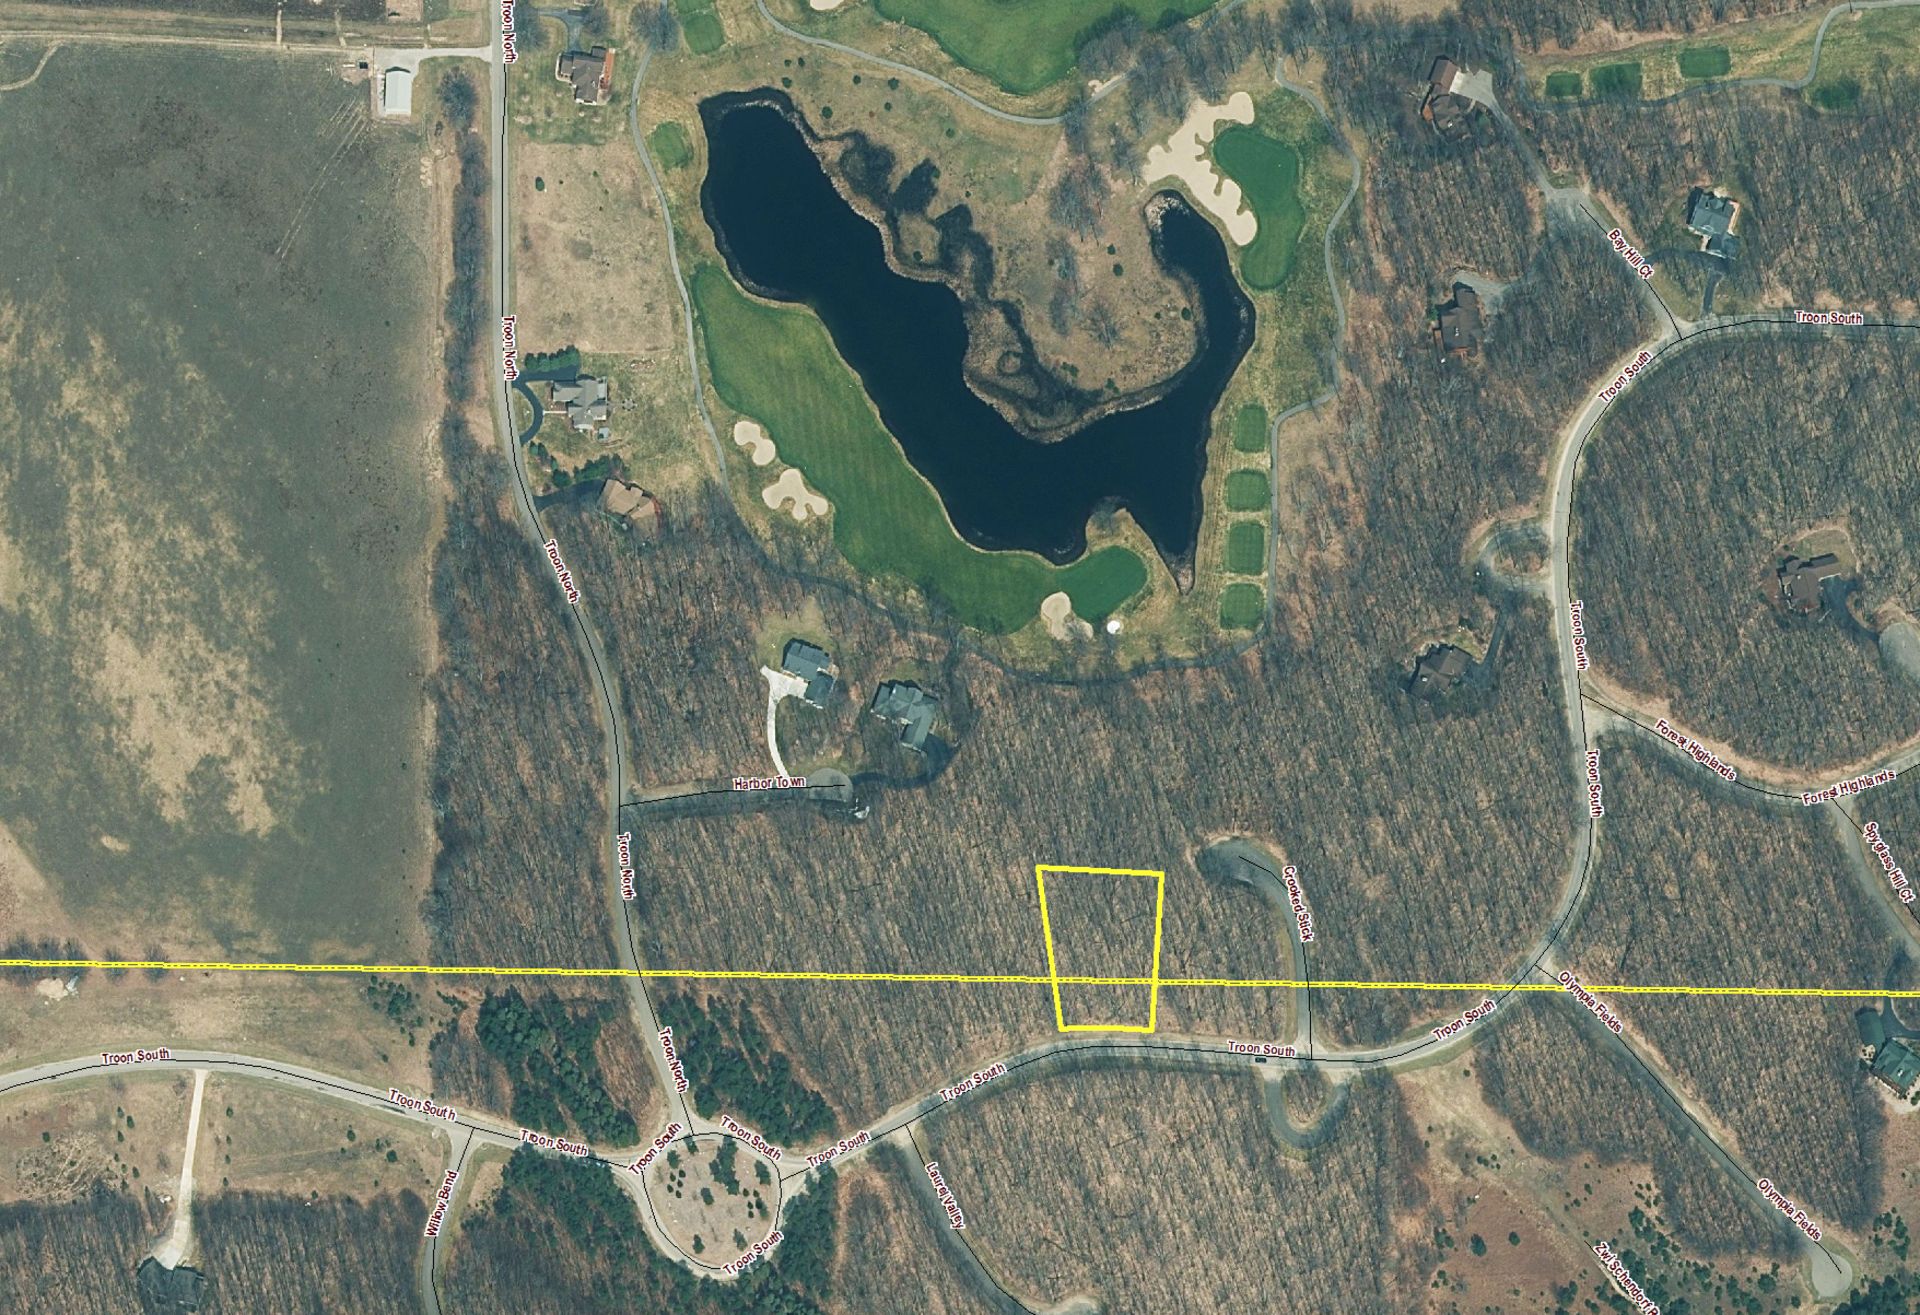 3/4 Acre Near a Beautiful Golf Course in Custer Township, Michigan! - Image 4 of 8